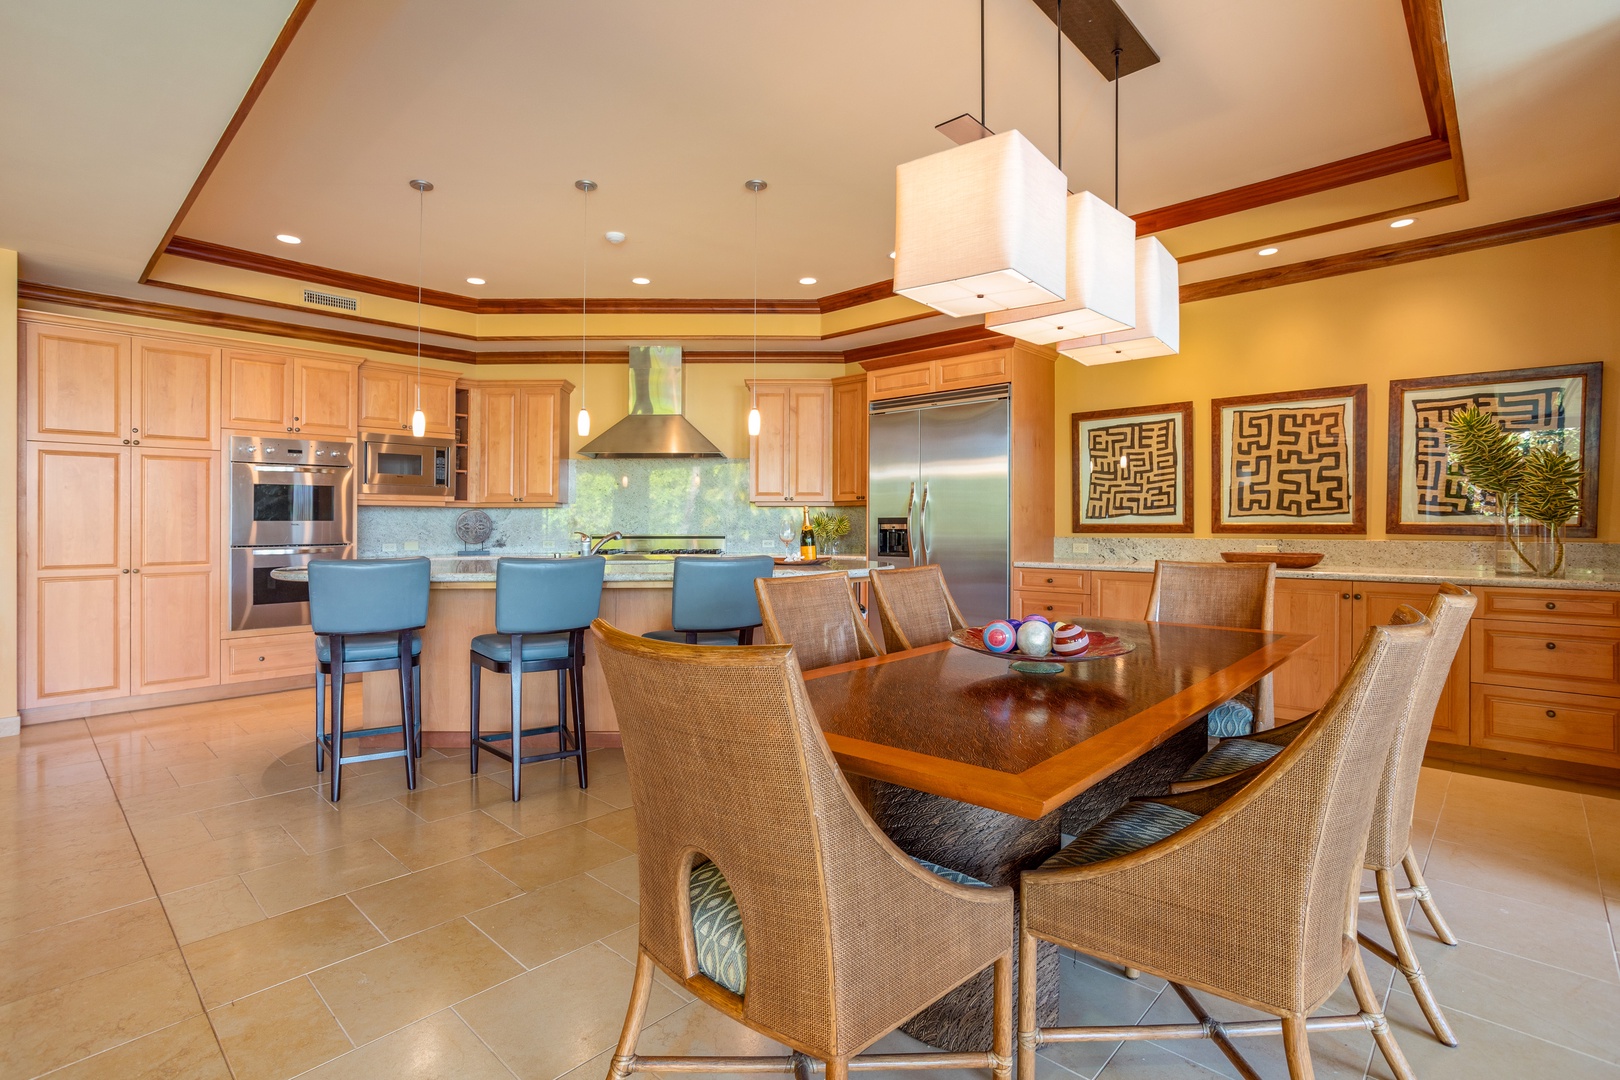 Kamuela Vacation Rentals, Kaunaoa 7B at Mauna Kea Resort - Gourmet Kitchen overlooks Dining Room with seating for the whole family